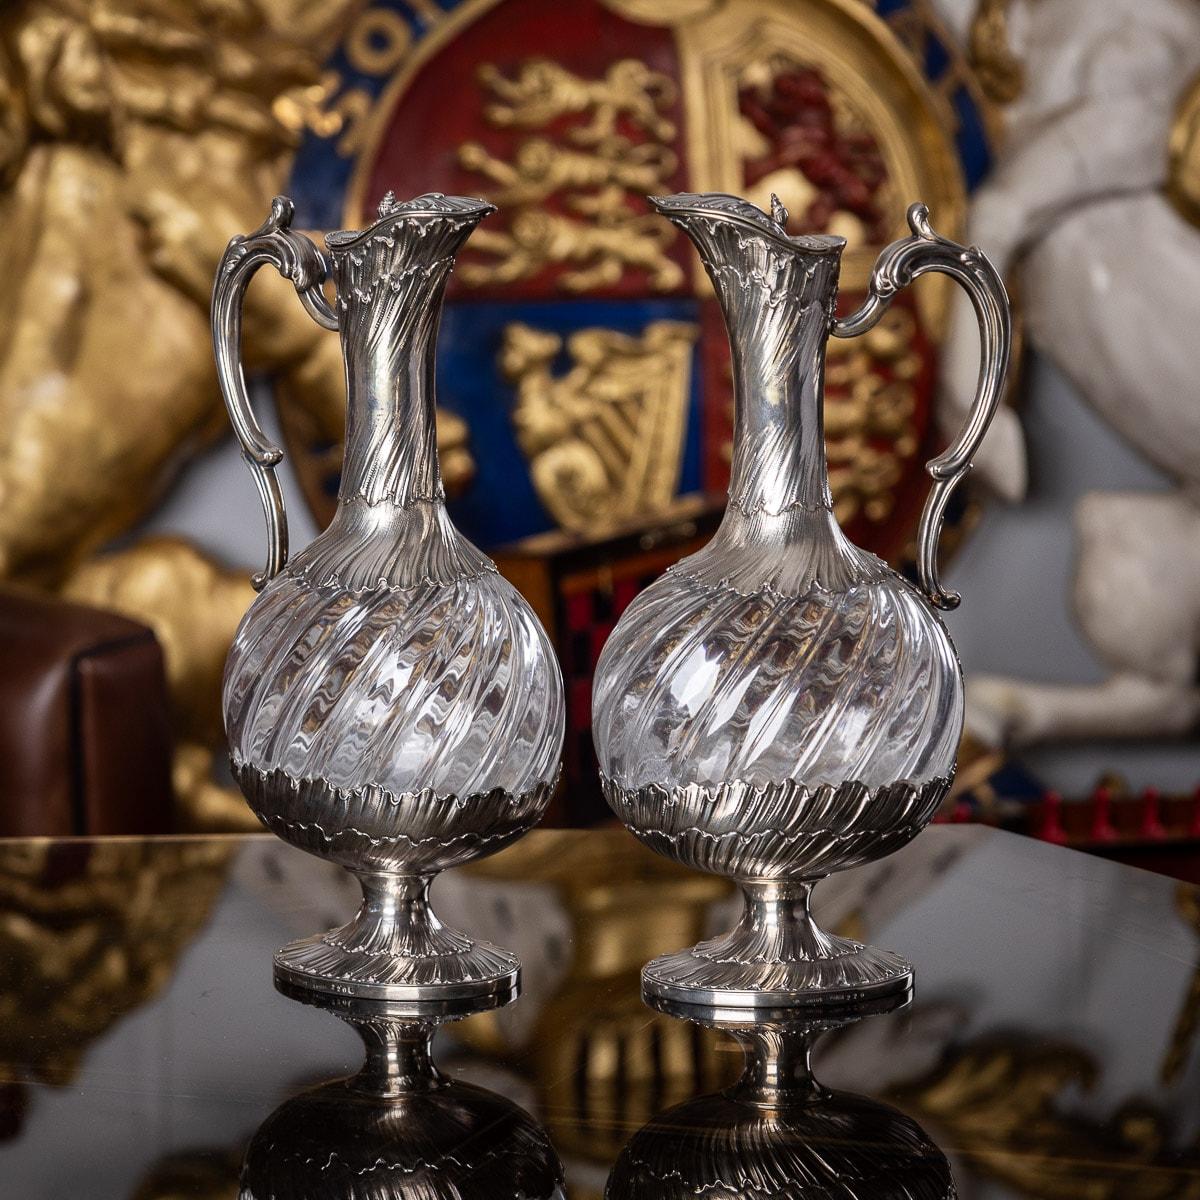 Antique late 19th century French solid silver and clear glass pair of claret jugs, each body is of baluster form, beautifully swirled glass, the applied silver foot, neck and scroll handle are chased with leaves and scrolls, the hinged lid is